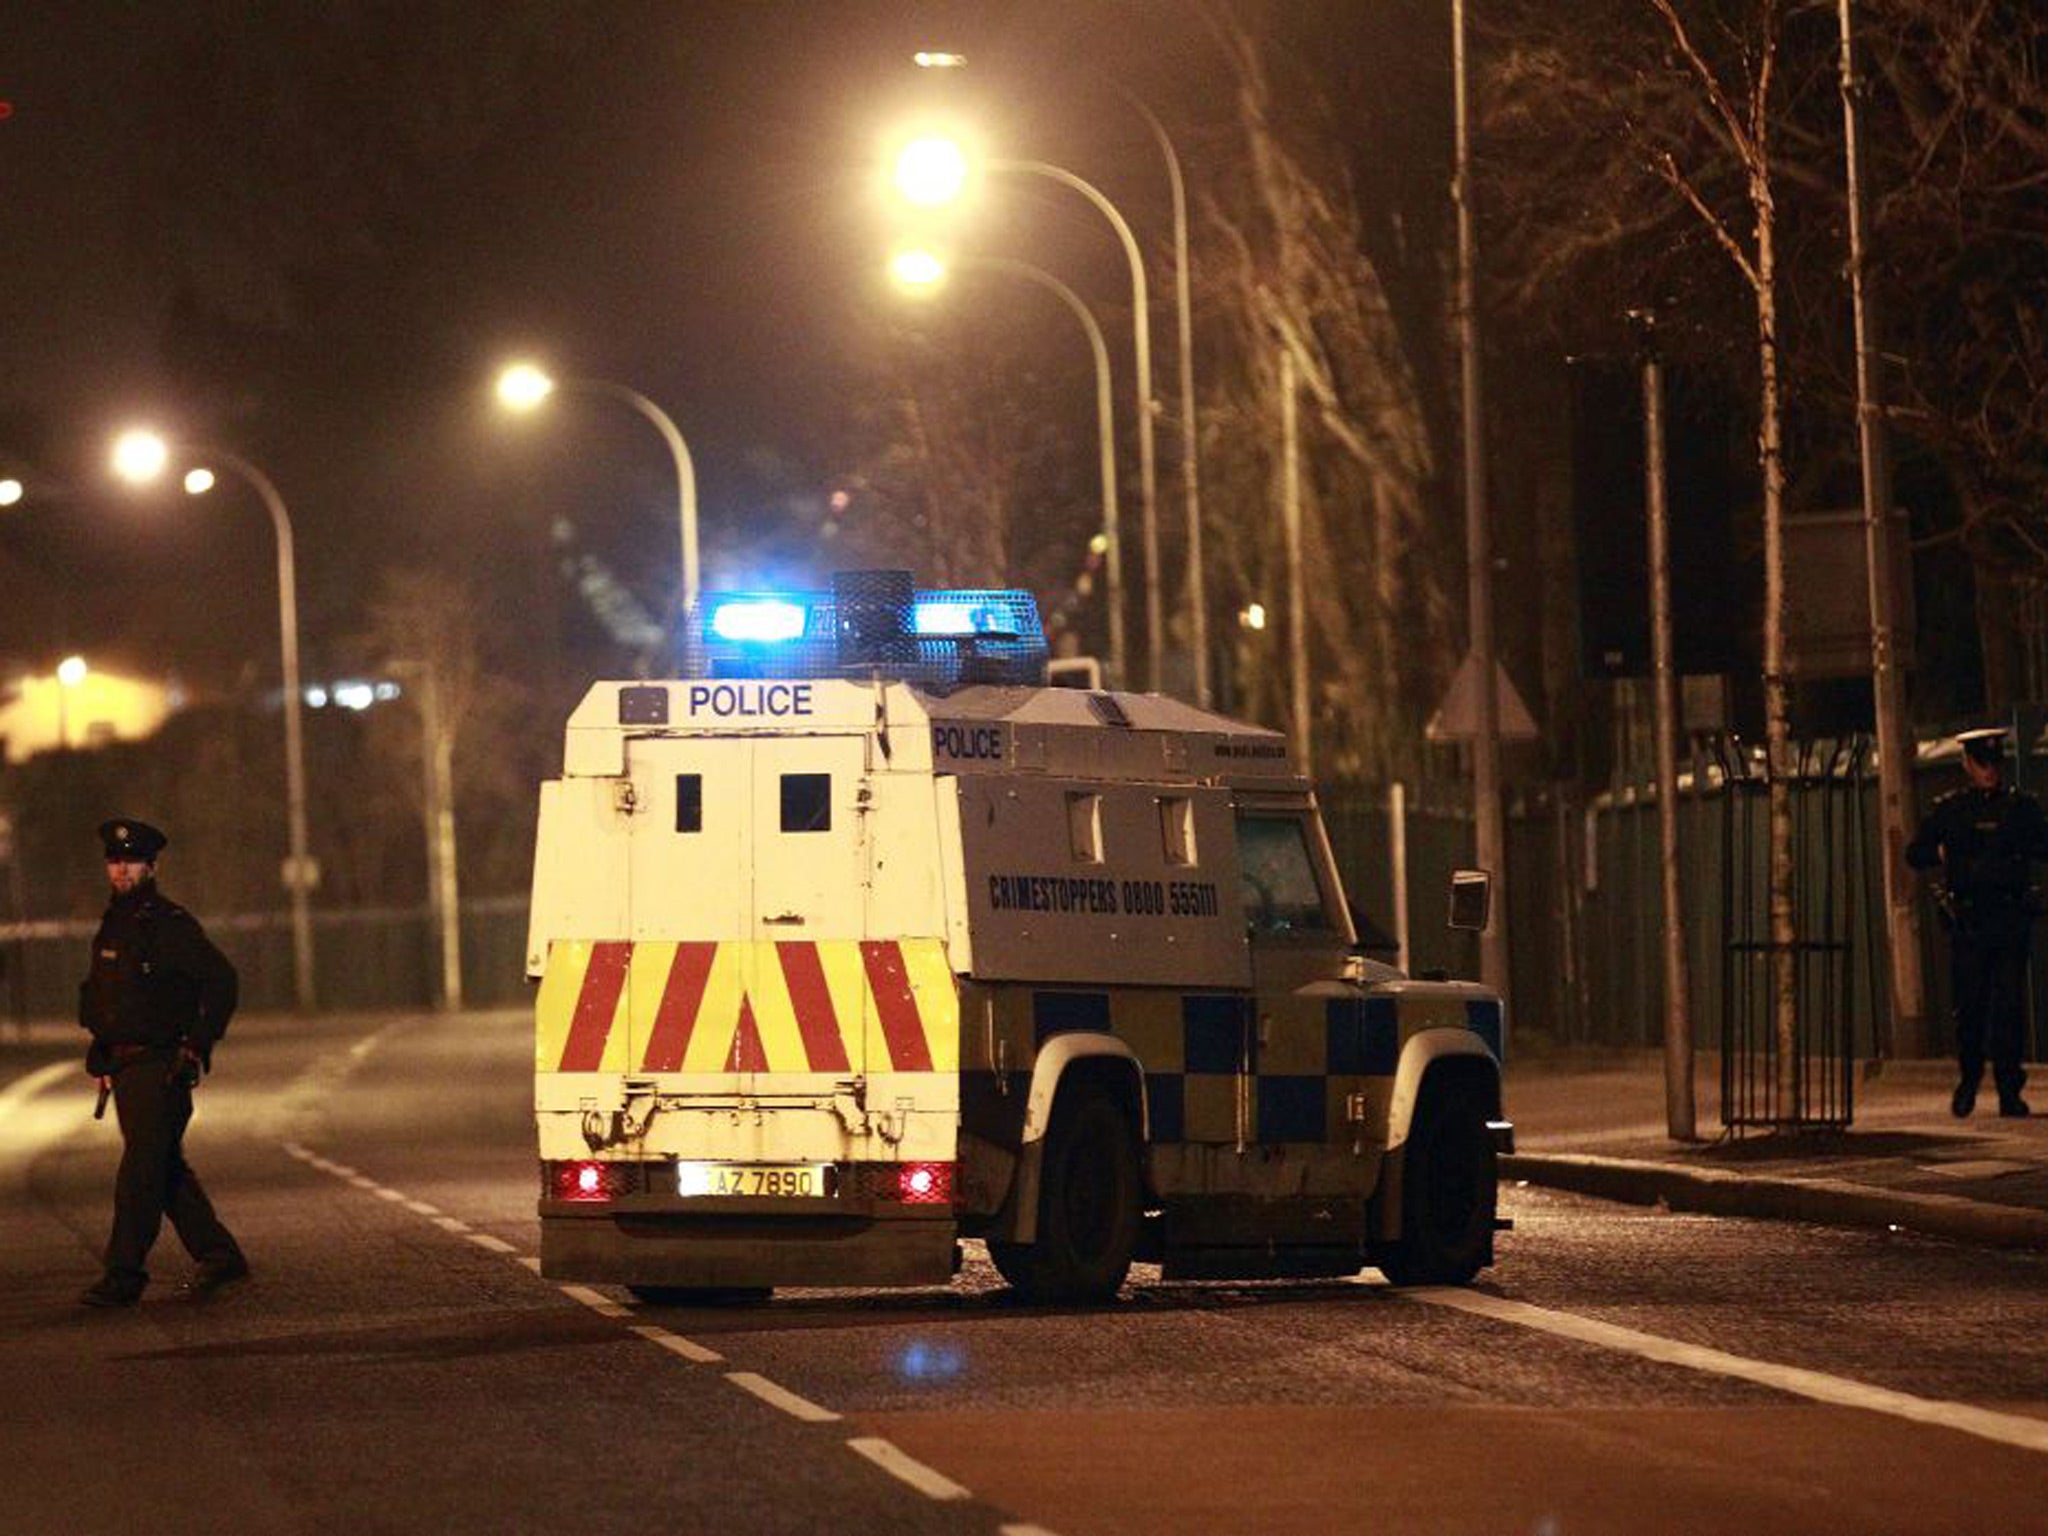 It fell from the vehicle and failed to explode, and even though the target has not been positively identified, the PSNI has not ruled out the possibility it was meant for one of their officers